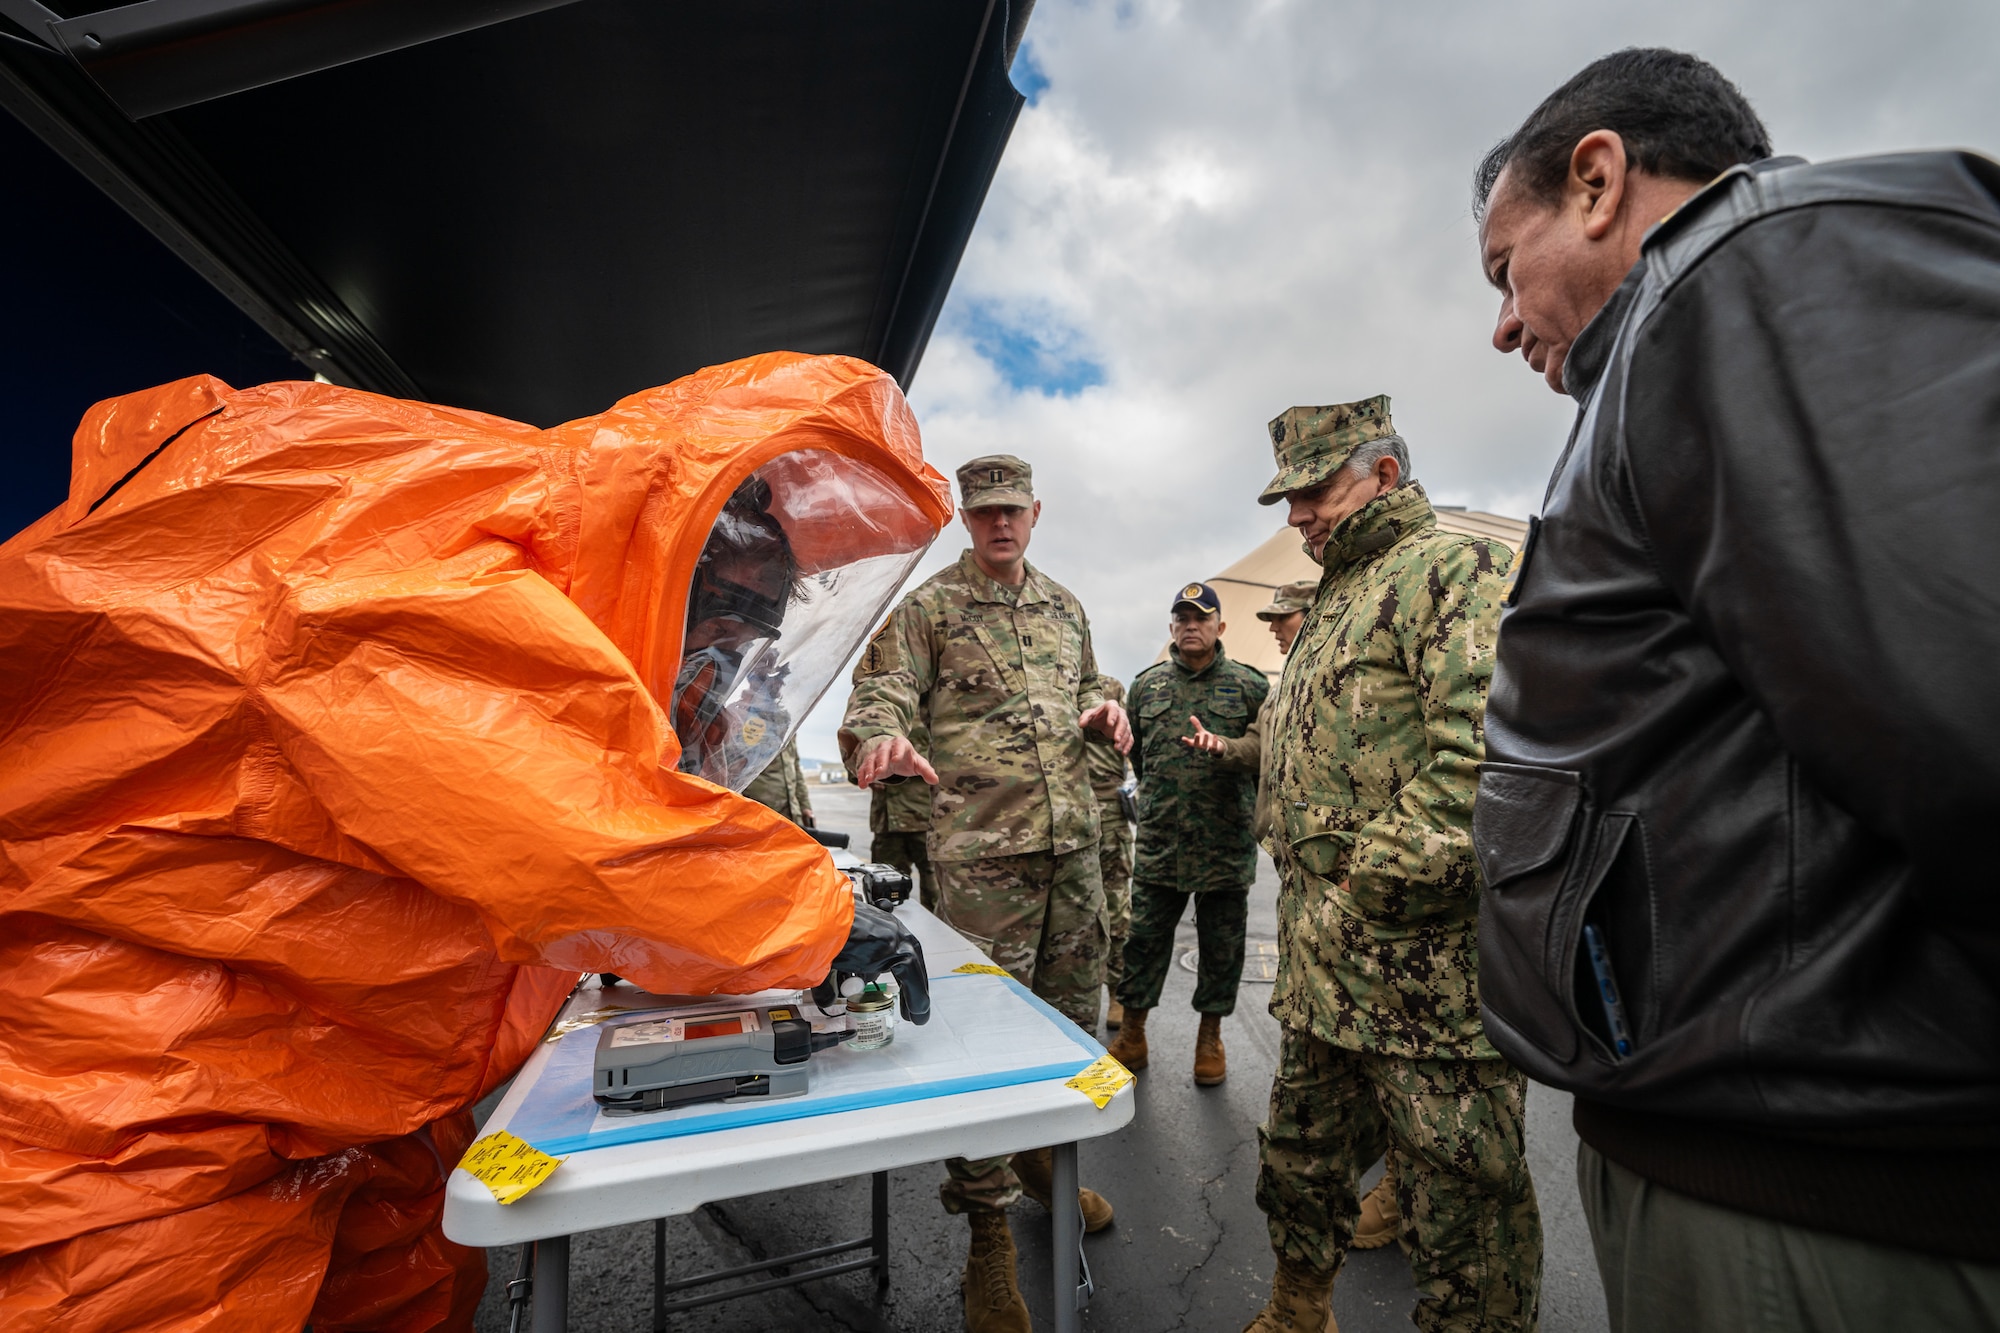 A U.S. Army Soldier assigned to the Kentucky National Guard’s 41st Civil Support Team – Weapons of Mass Destruction, identifies a potentially hazardous chemical using Raman spectroscopy as part of a demonstration for Ecuadorian military leaders at the Kentucky Air National Guard Base in Louisville, Ky., Jan. 31, 2024. The Ecuadorians are visiting this week to exchange information with the Kentucky National Guard as part of the State Partnership Program, a National Guard Bureau effort that pairs Guard units with foreign allies to foster enhanced understanding across all aspects of civil and military affairs. (U.S. Air National Guard photo by Dale Greer)